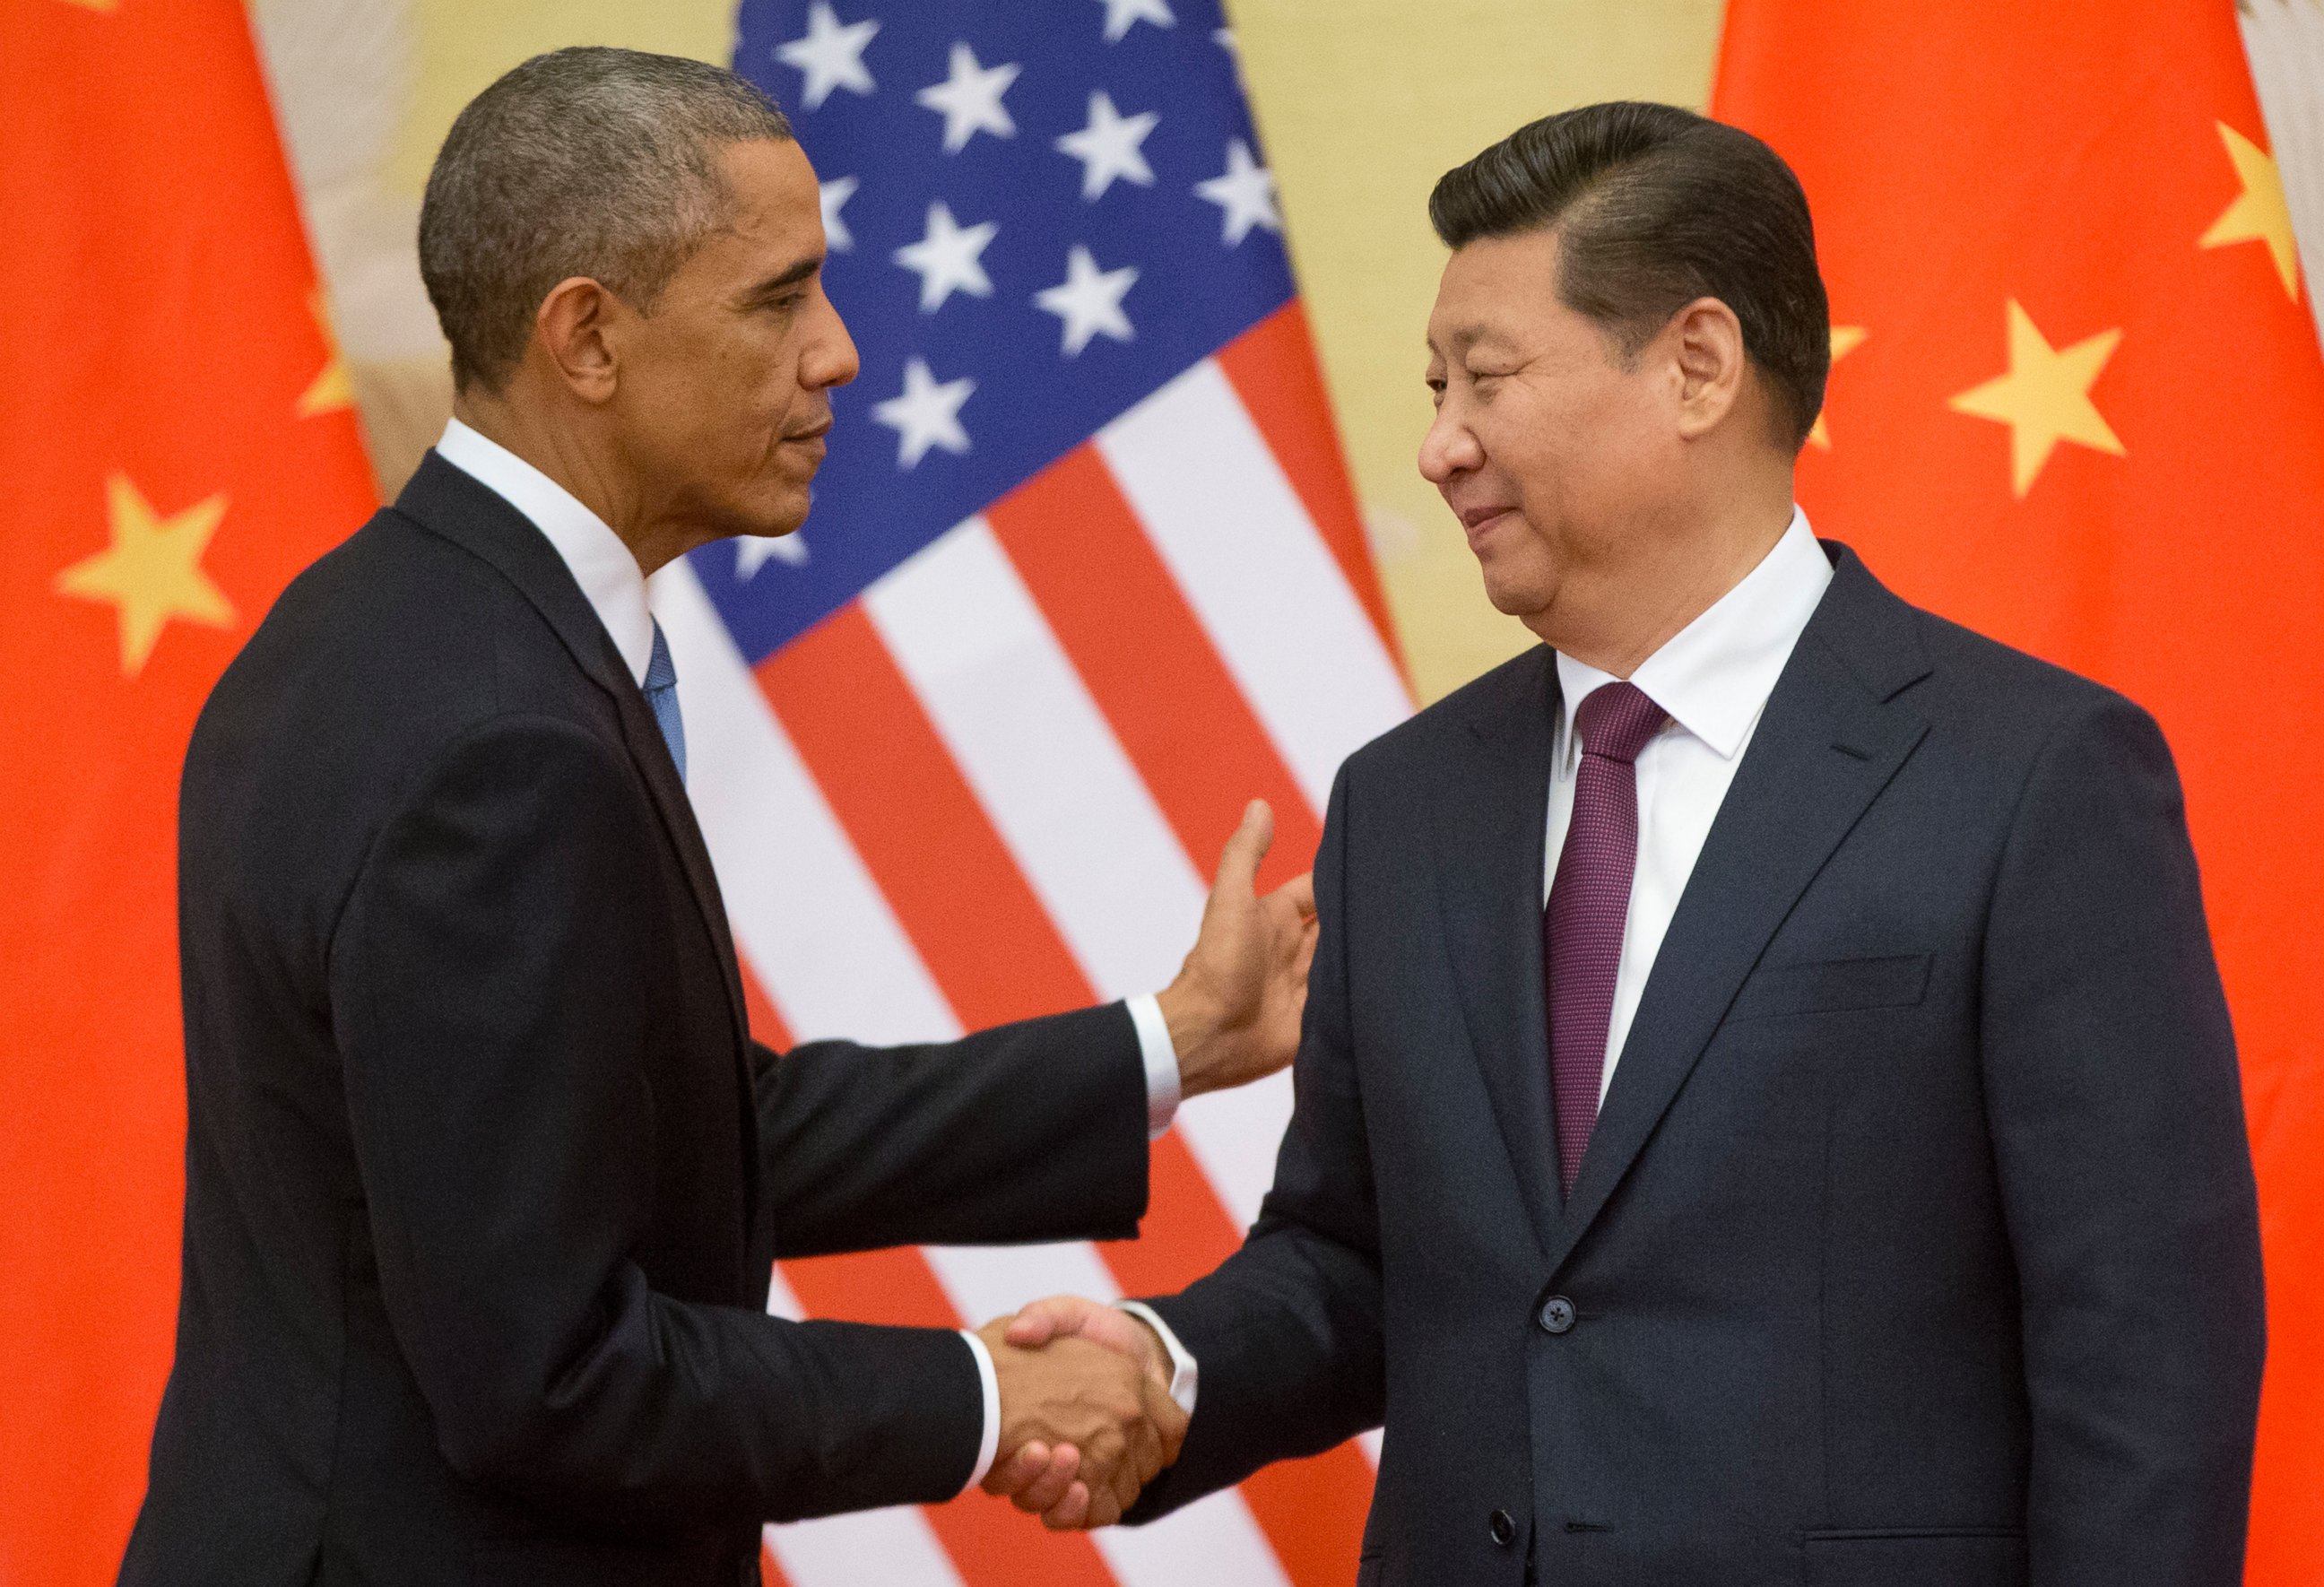 U.S. President Barack Obama, left,  and Chinese President Xi Jinping shake hands following the conclusion of their joint news conference at the Great Hall of the People in Beijing, Nov. 12, 2014.